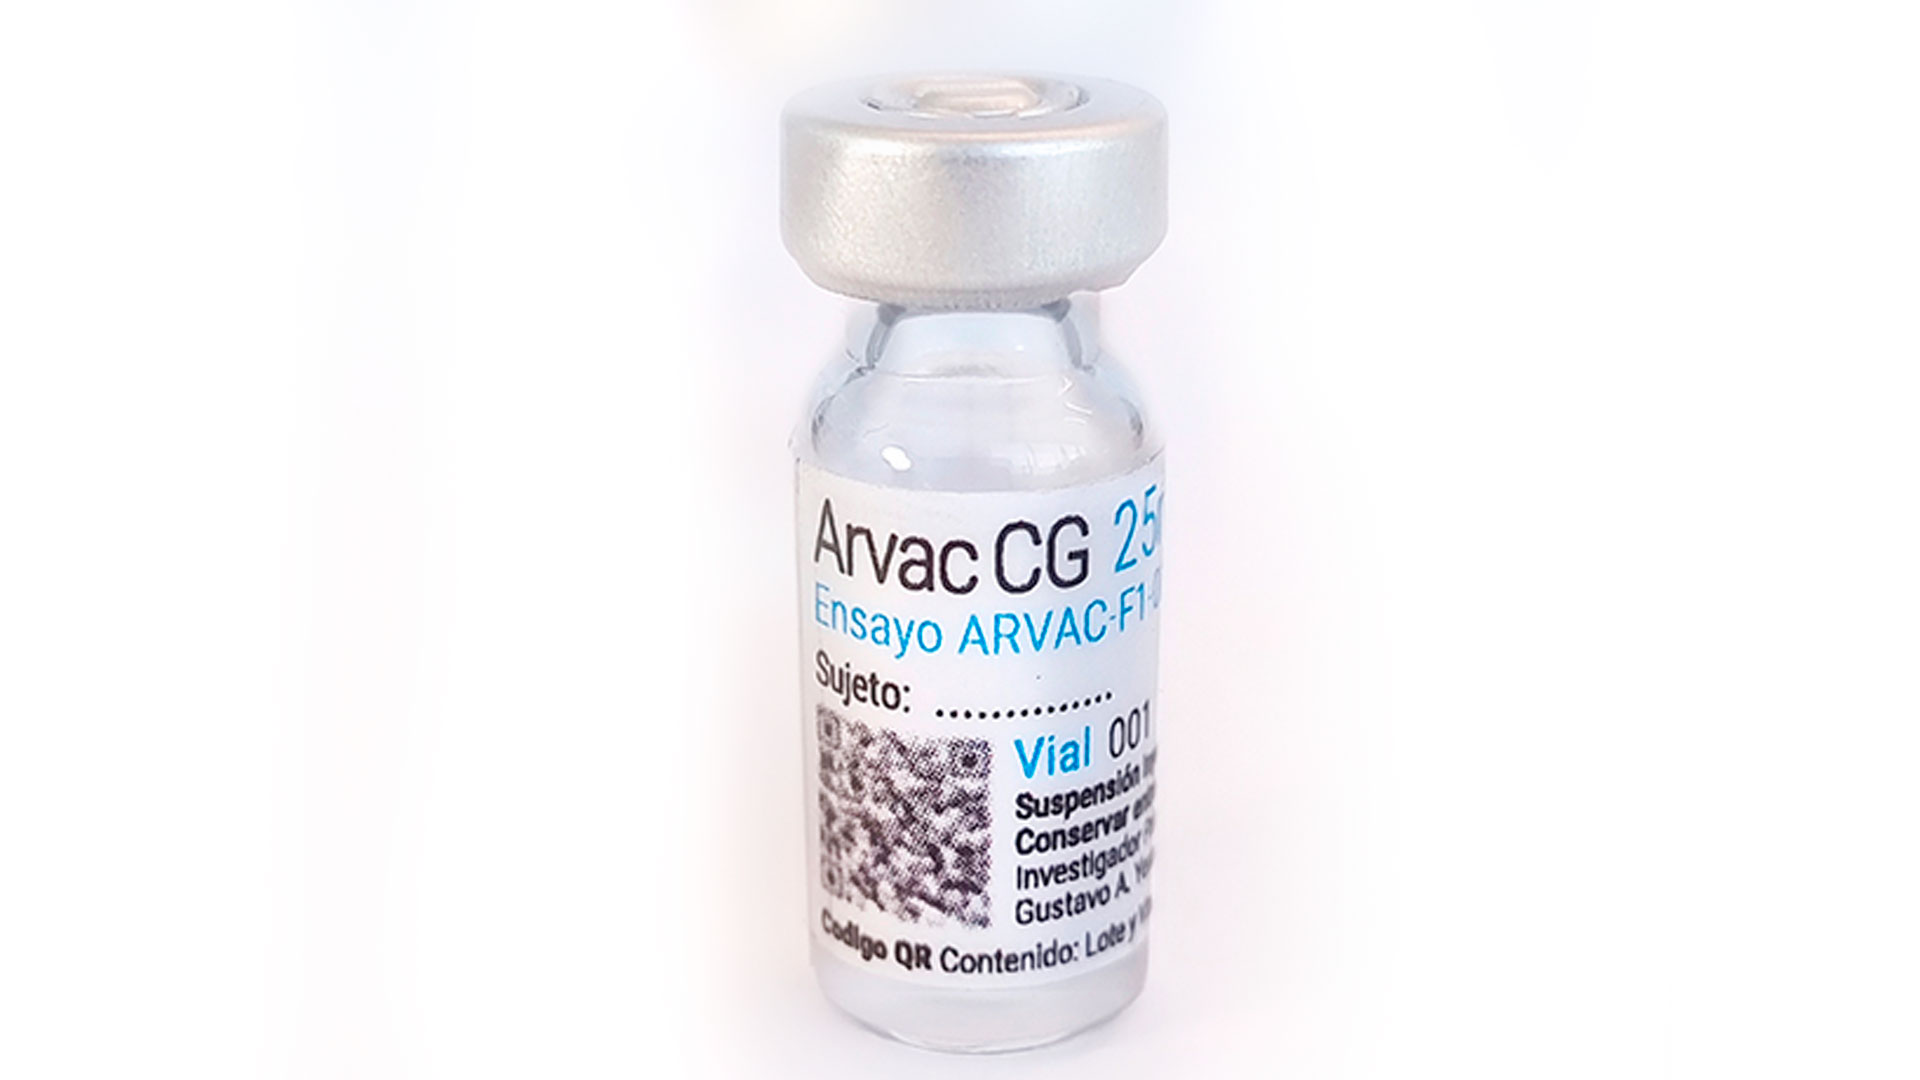 The national ARVAC Cecilia Grierson development of a bivalent vaccine is advancing rapidly, but it still has to go through one of the research phases